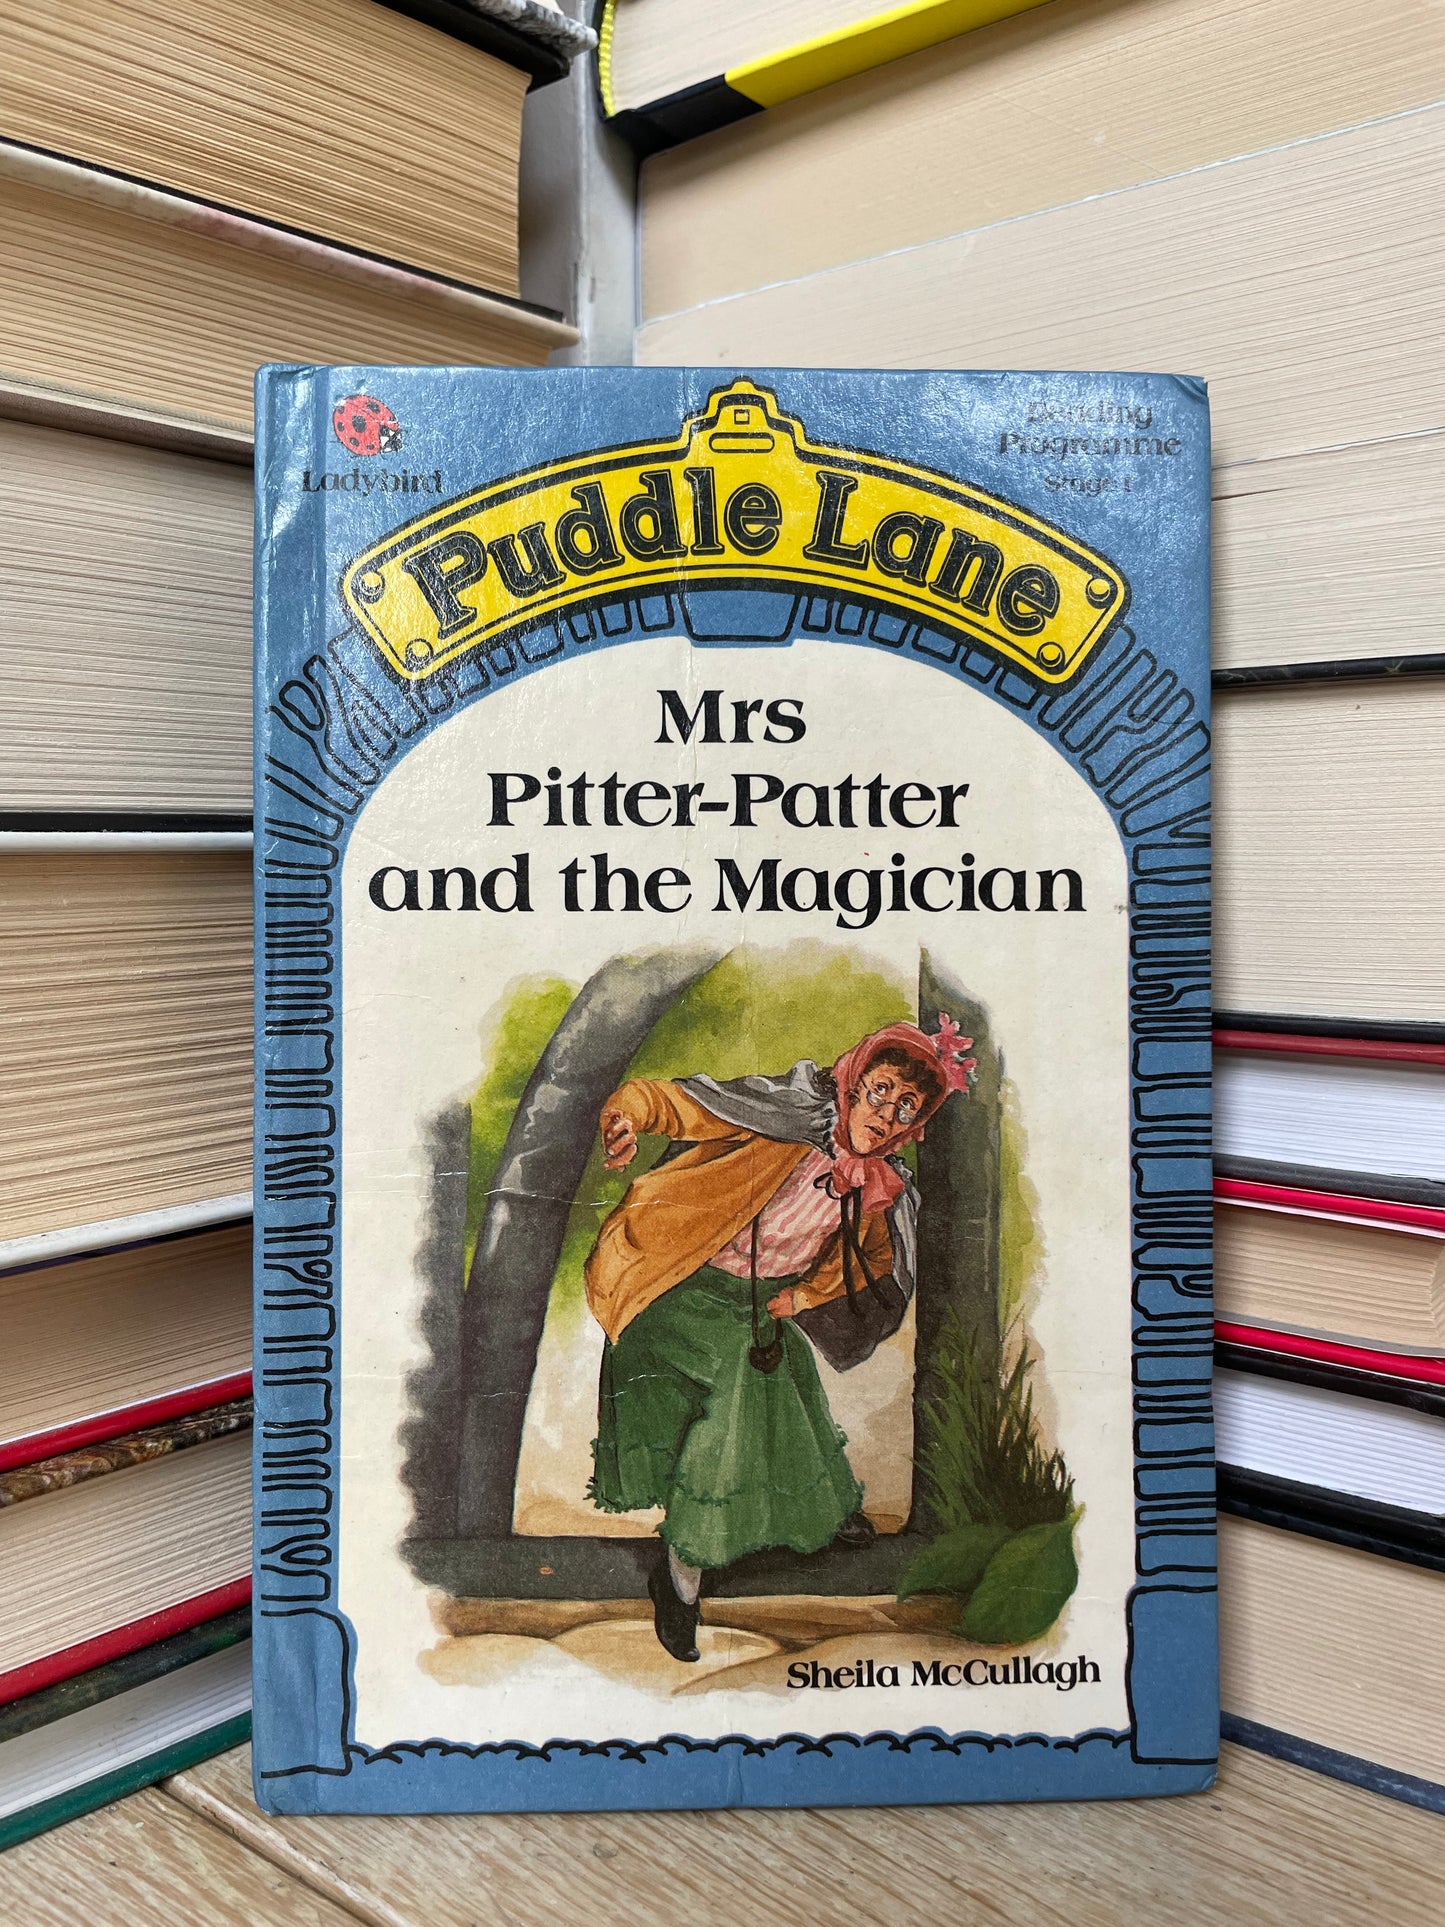 Sheila McCullagh - Mrs Pitter-Patter and the Magician